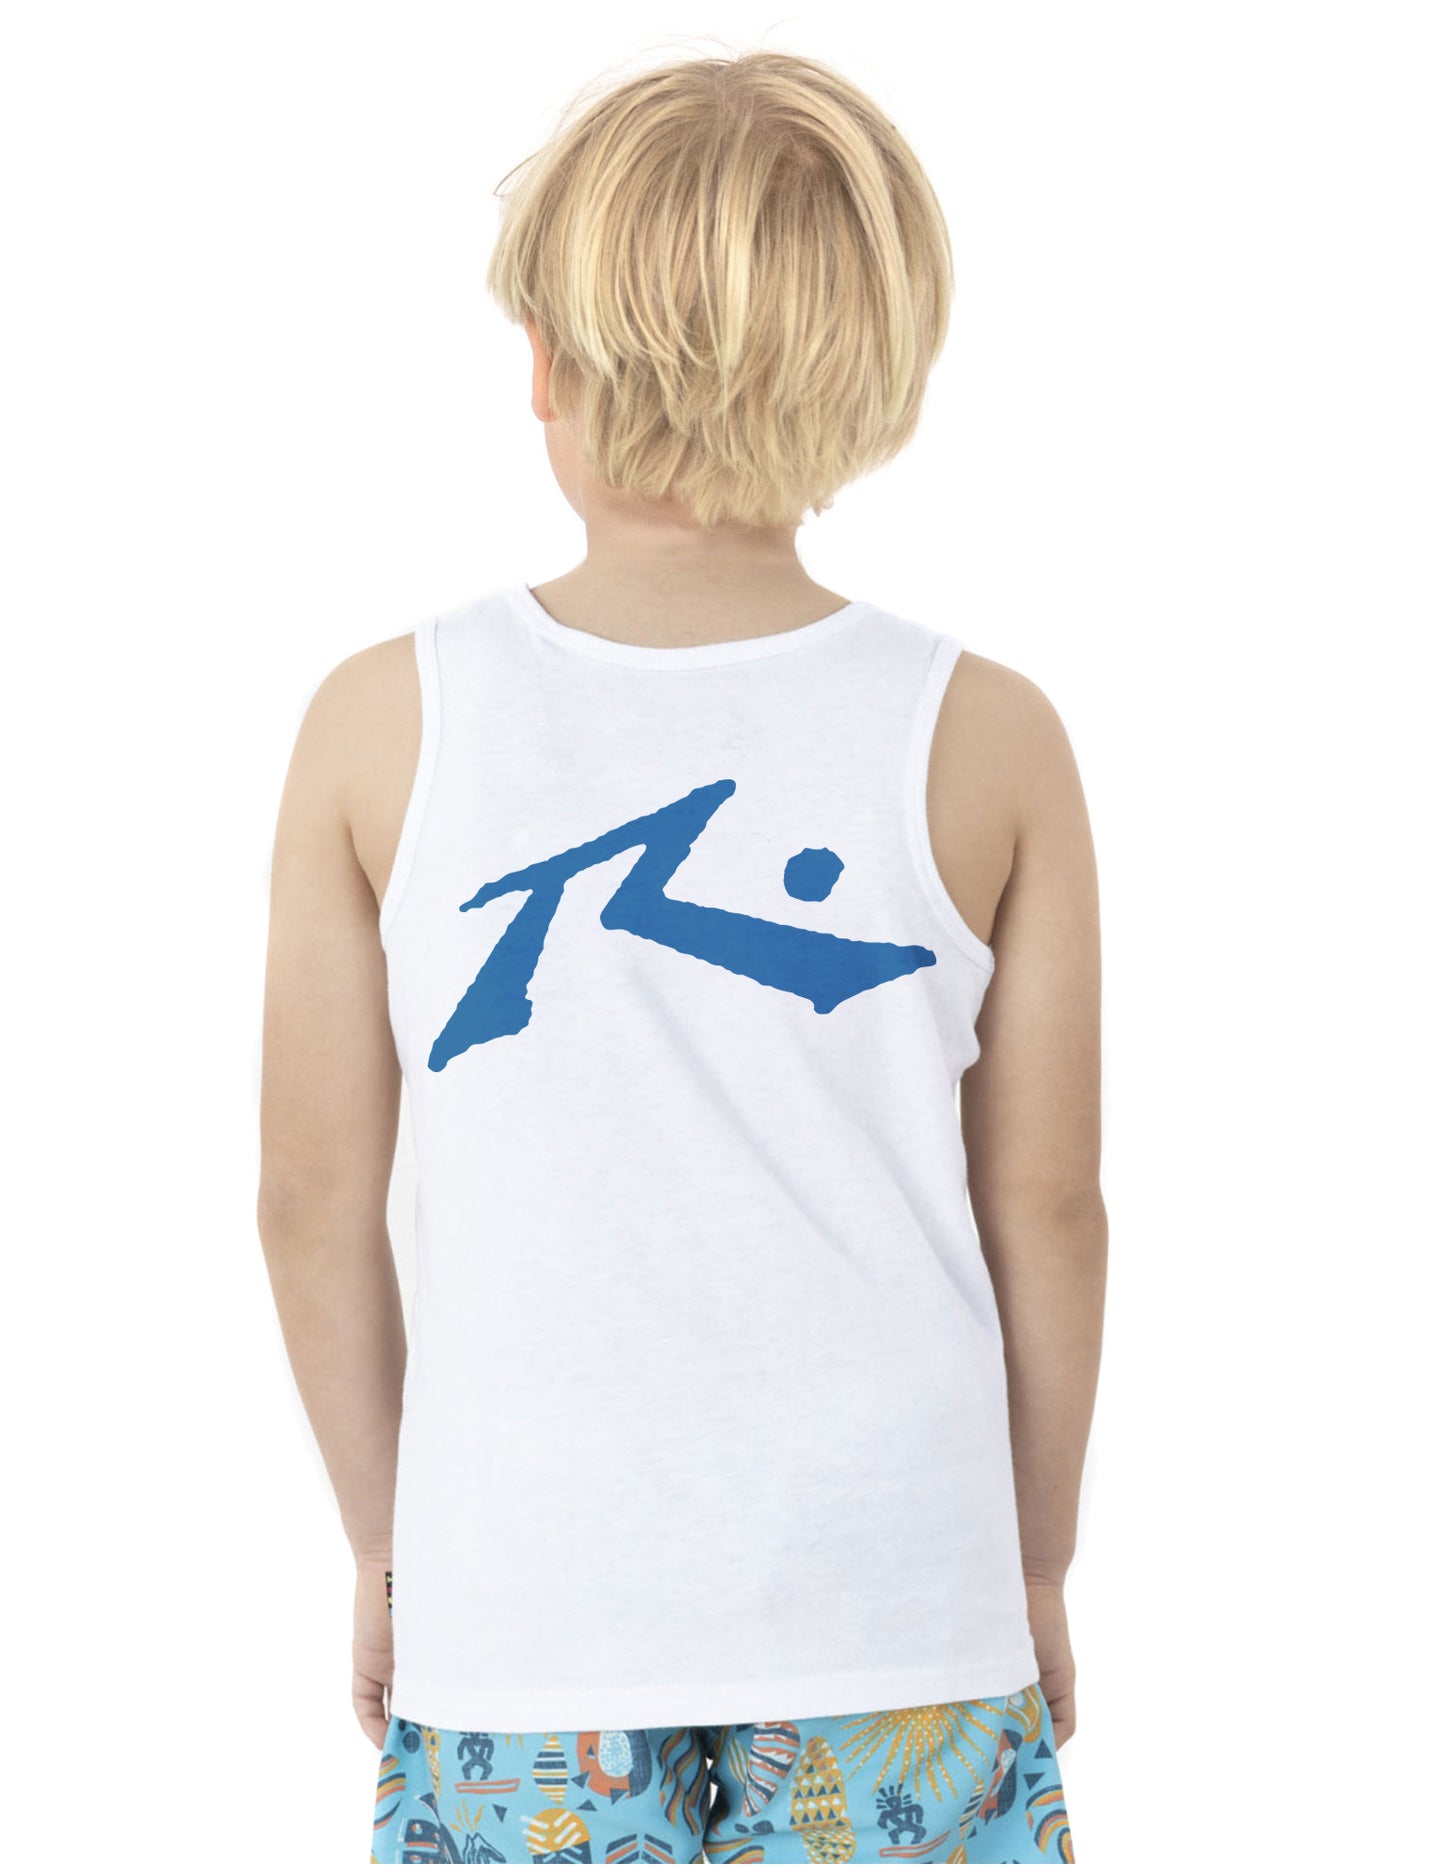 Musculosa Competition Runts White/Yonder